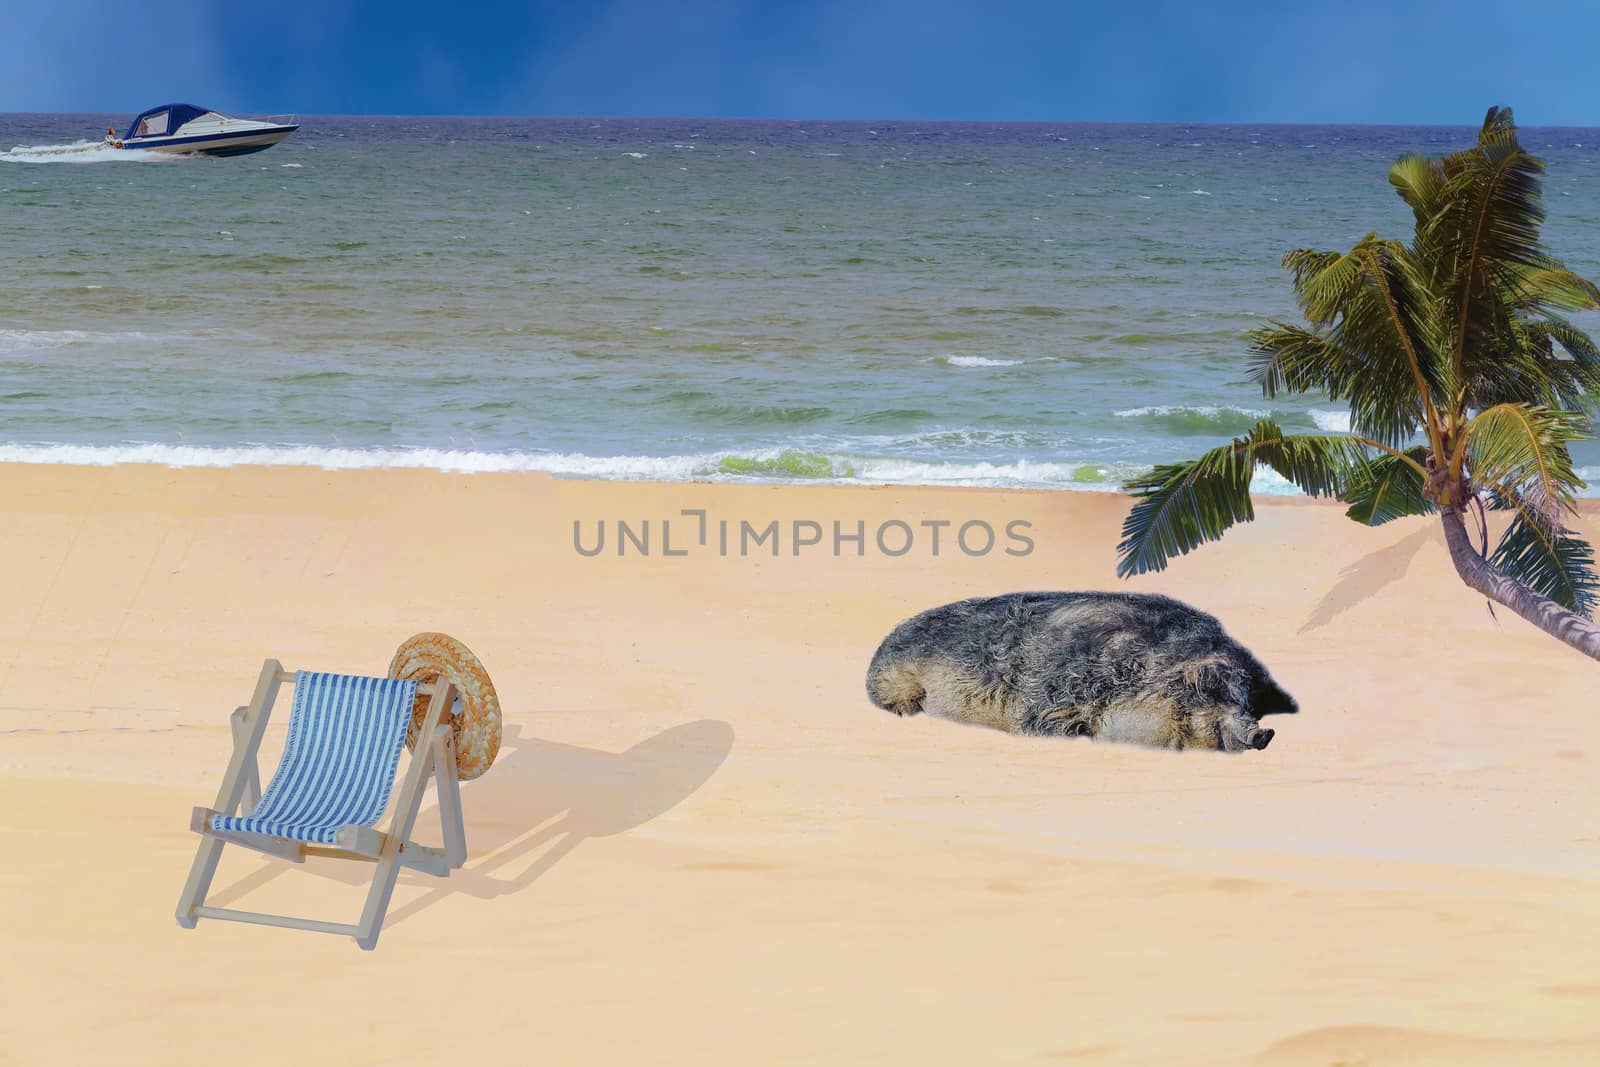 Lounging on the beach        by JFsPic